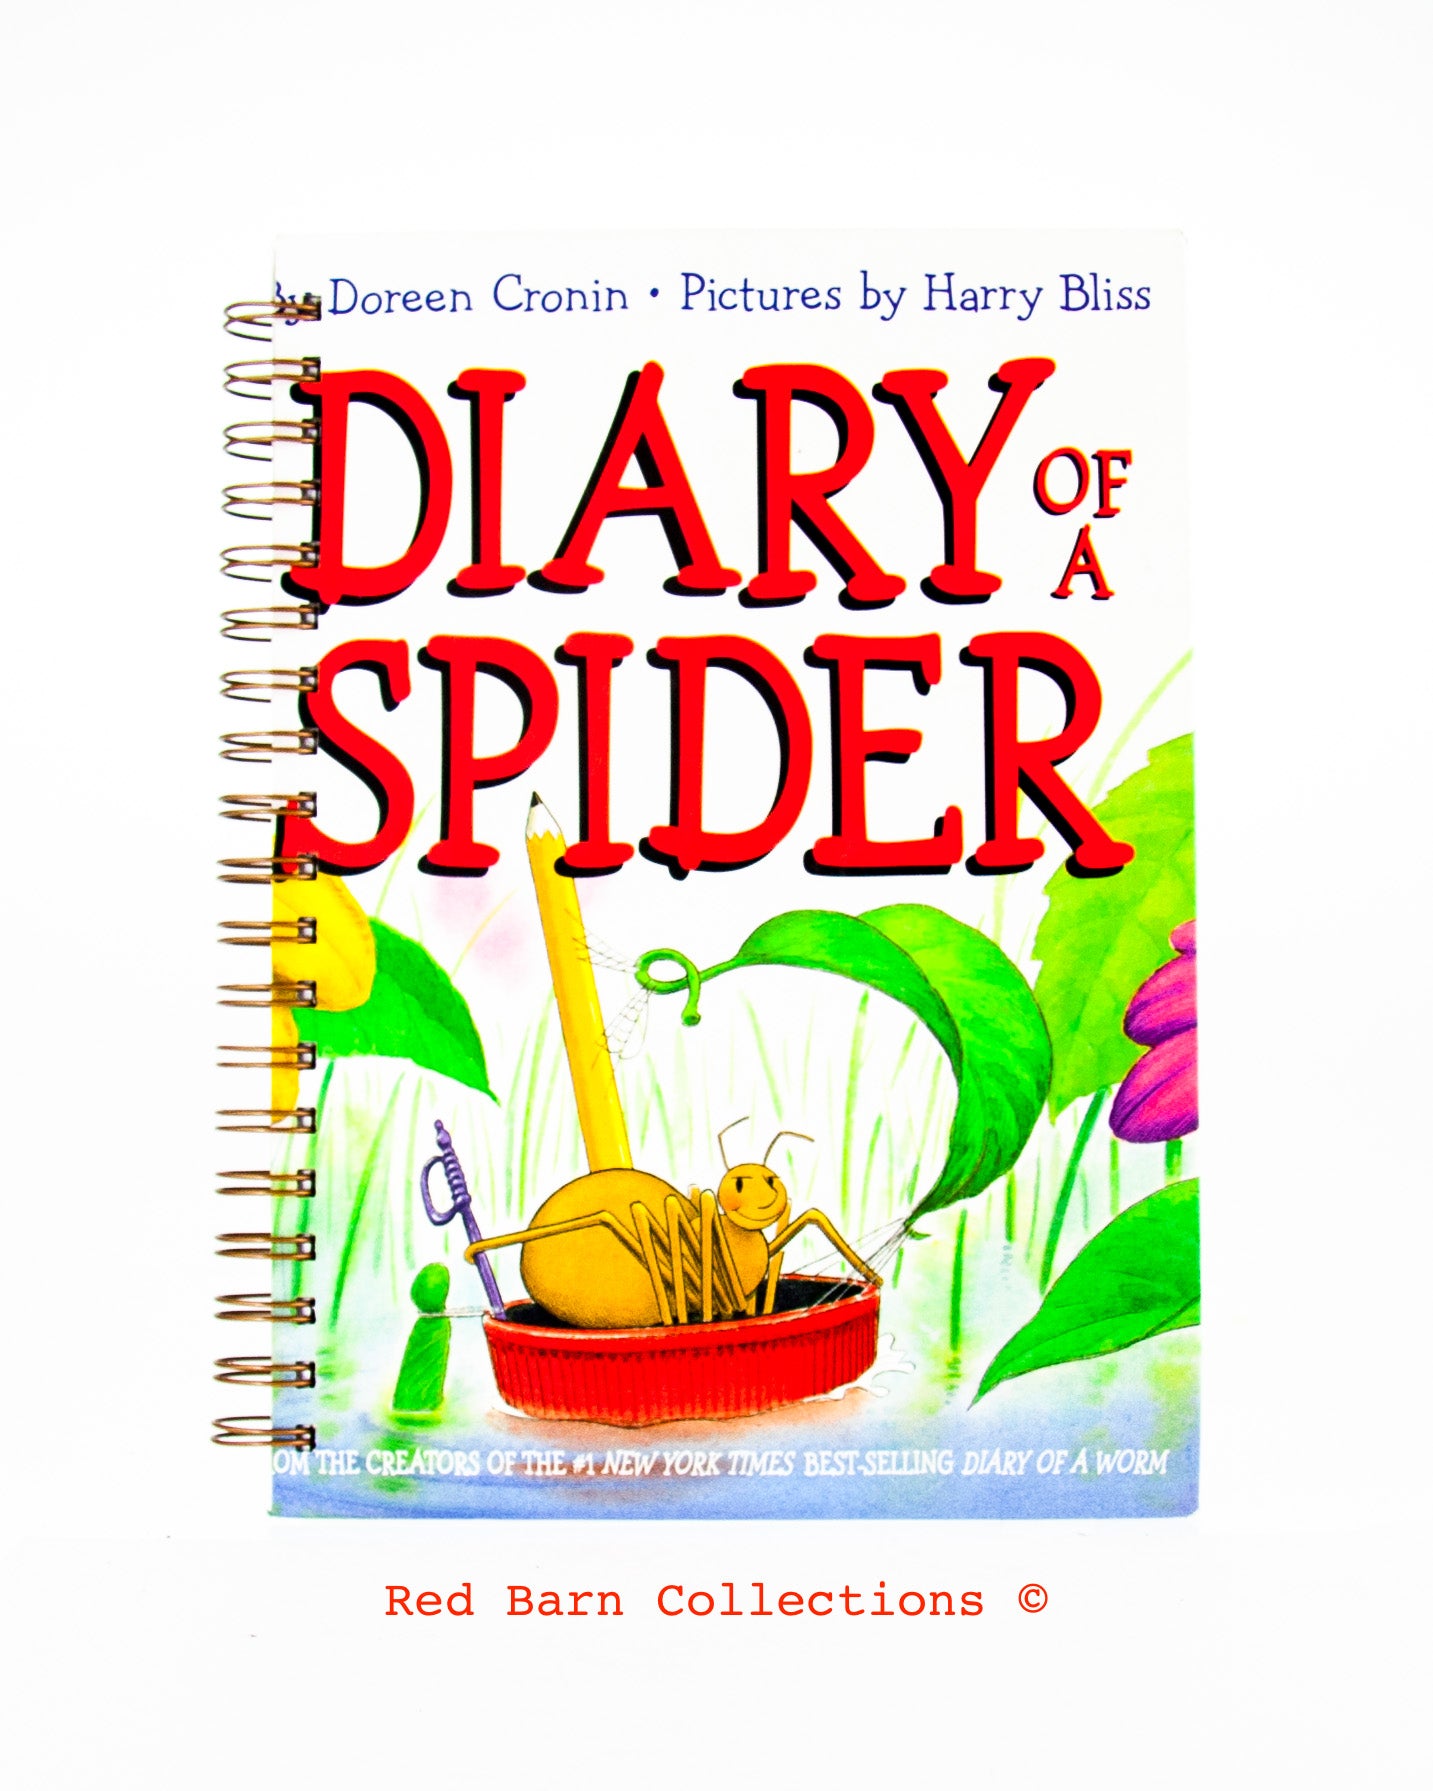 Diary of a Spider-Red Barn Collections